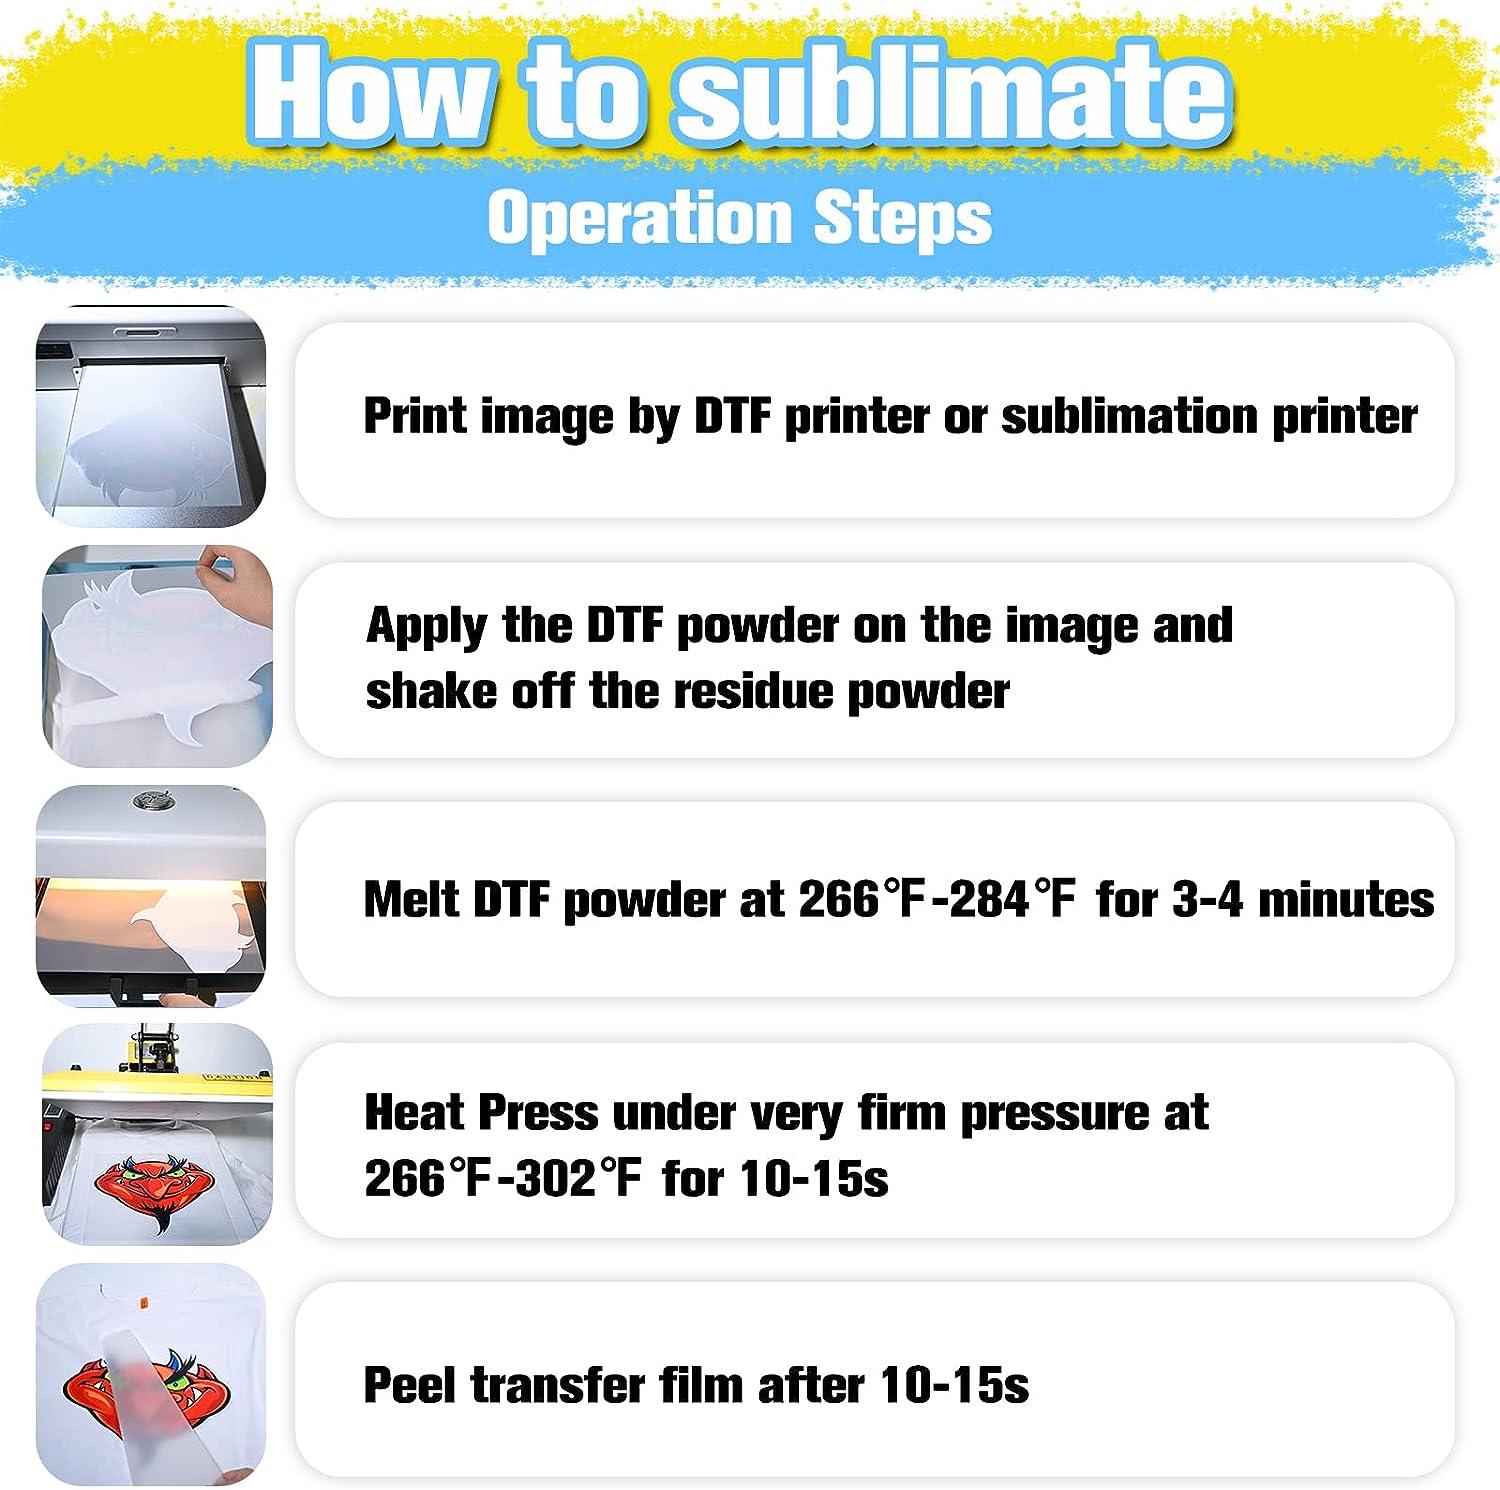 HOW TO SUBLIMATE ON COTTON with DTF Transfer Film and Powder